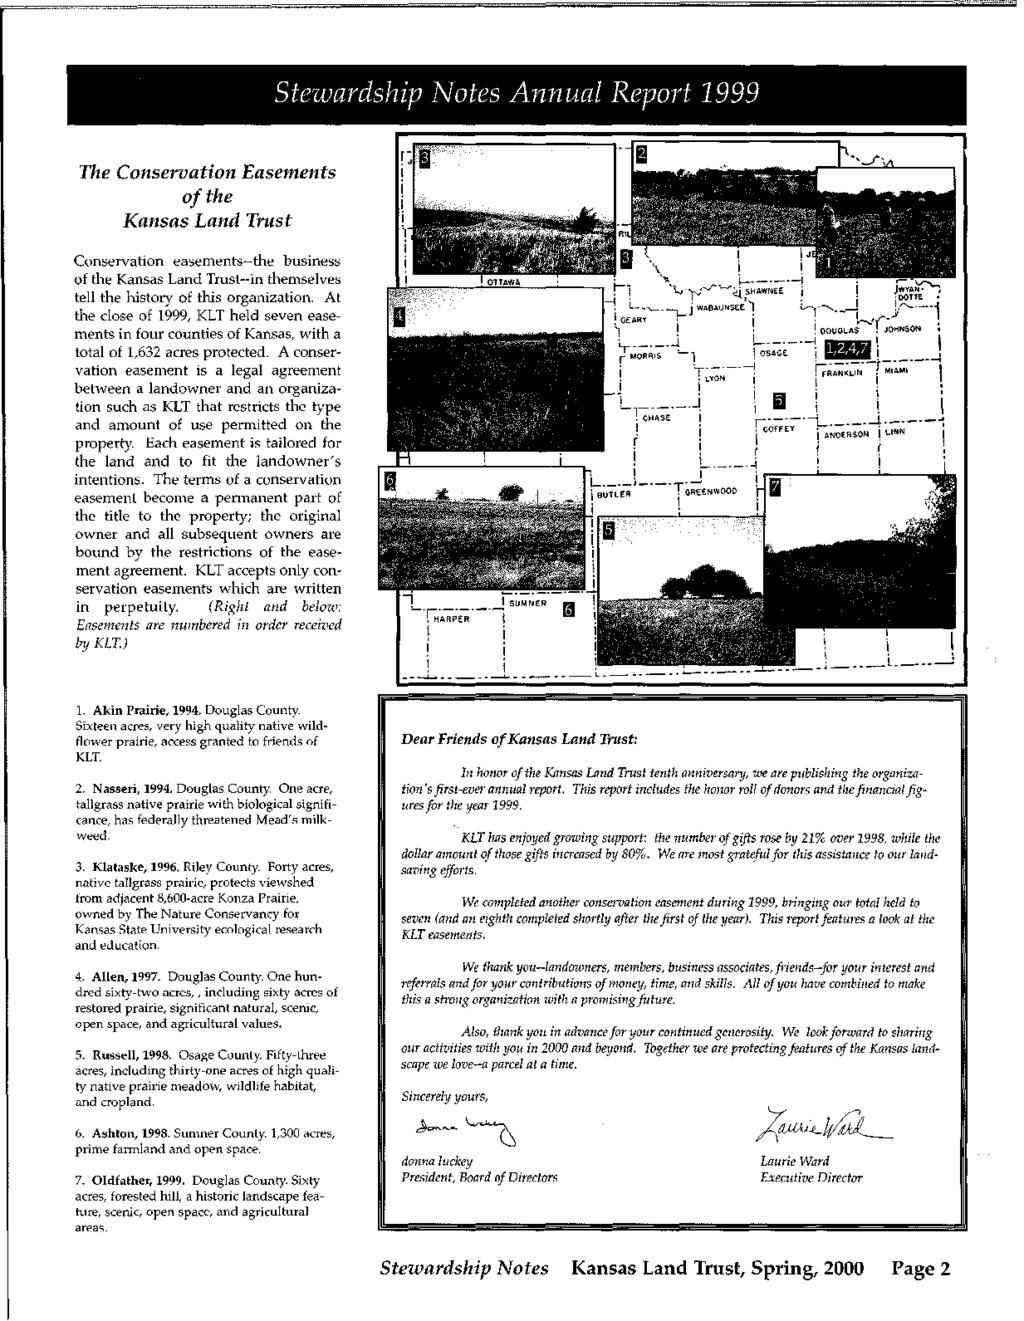 The Conservation Easements of the Kansas Land Trust Conservation easements--the business of the Kansas Land Trust--in themselves tell the history of this organization.